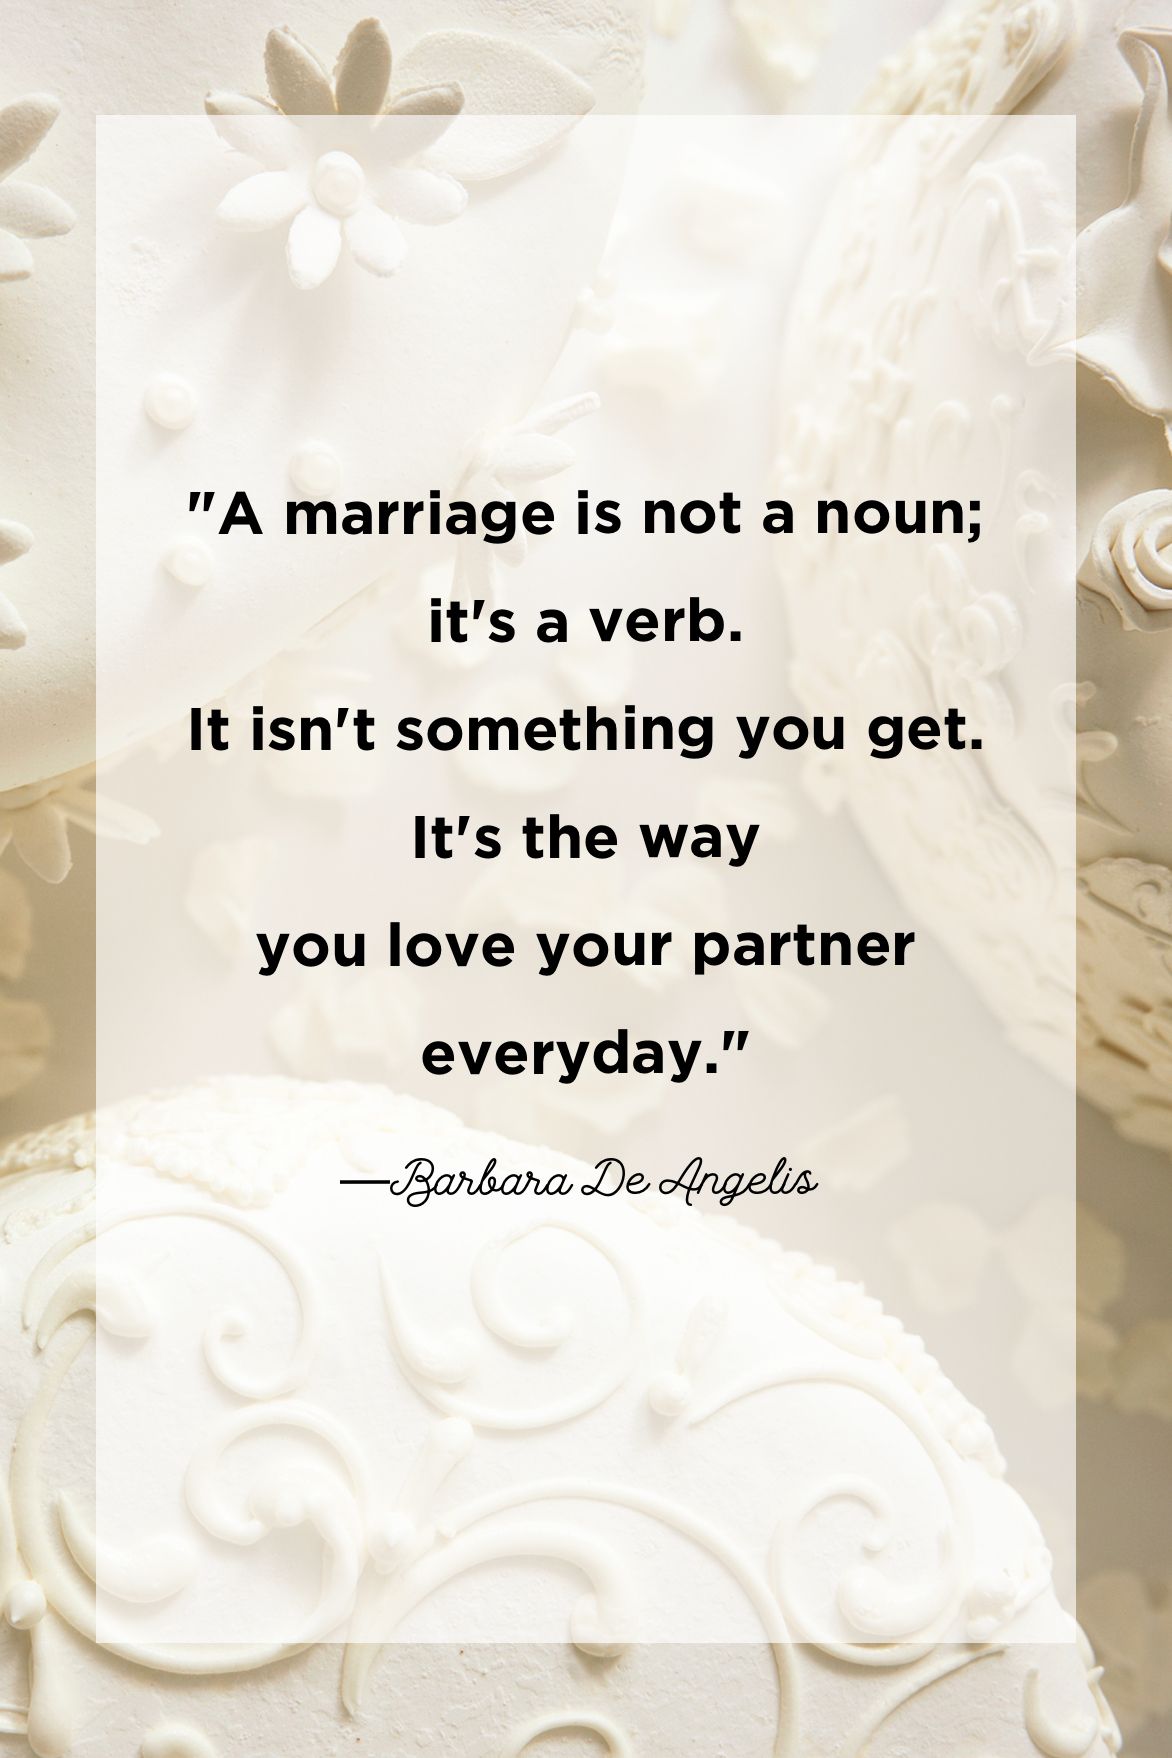 Isn t easy quotes marriage Struggling marriage?